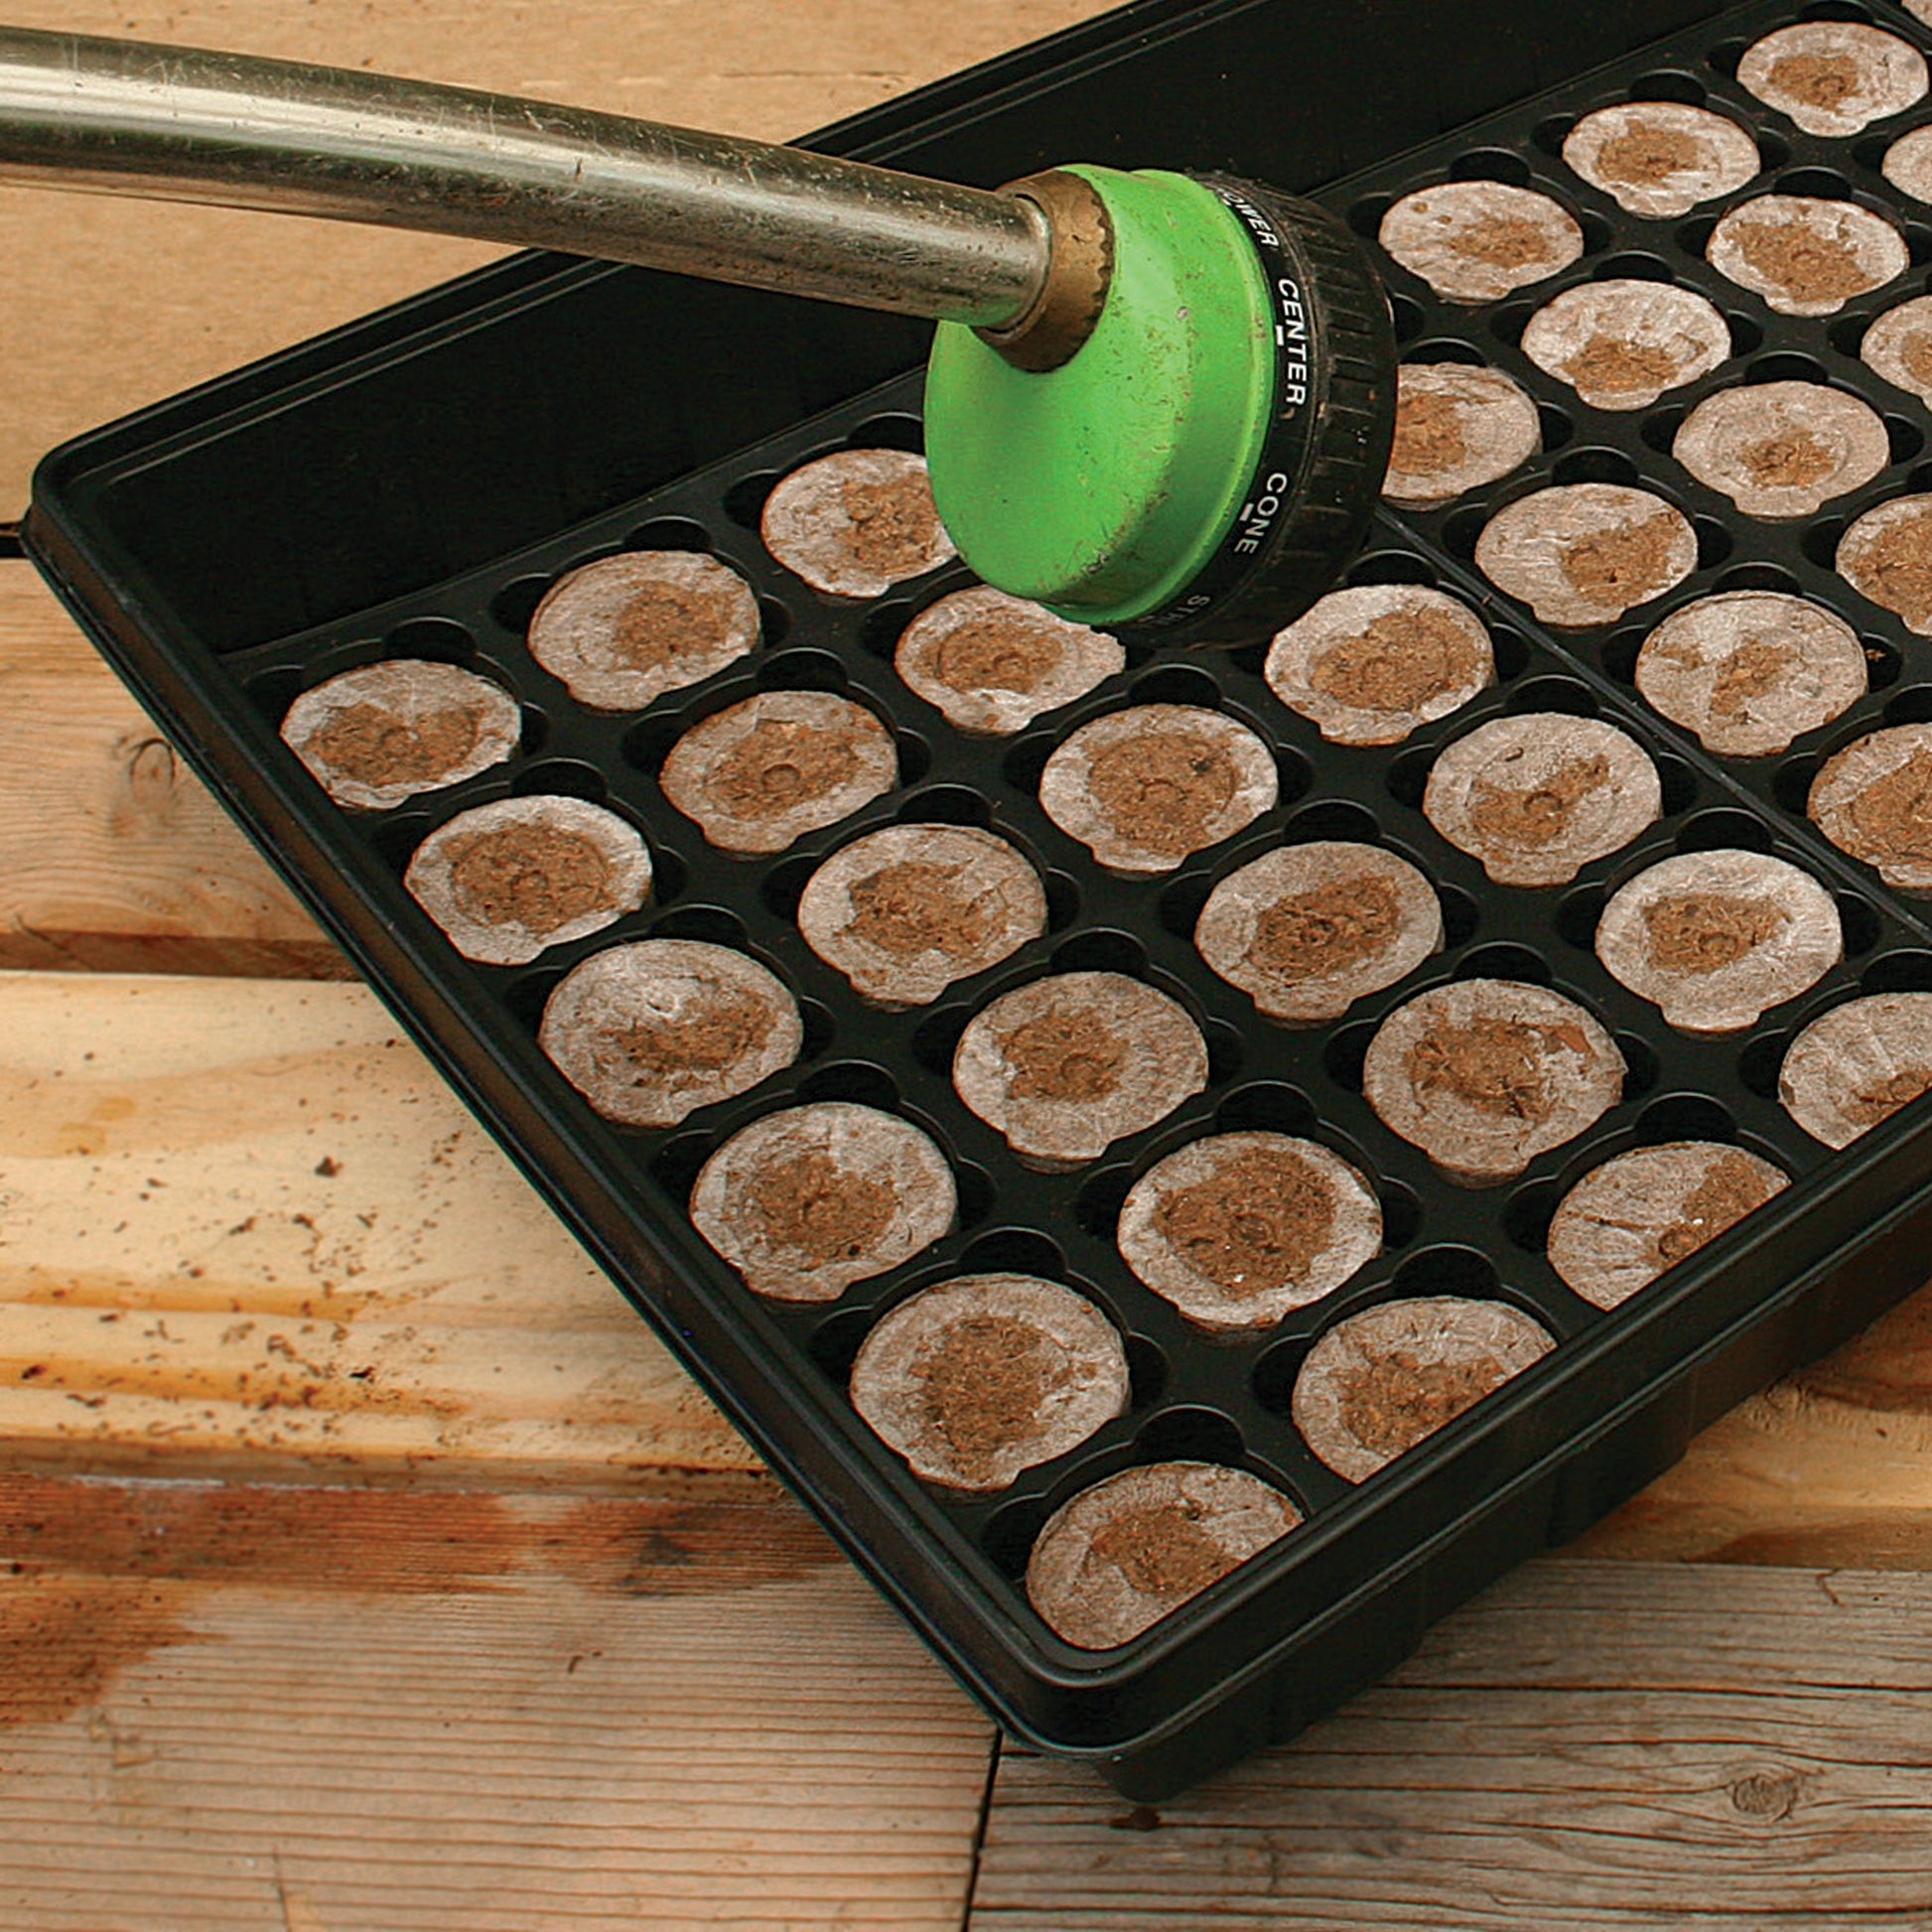 Add water to your watertight base tray with the peat pellets inside in order for them to absorb and expand so you can sow your seeds.